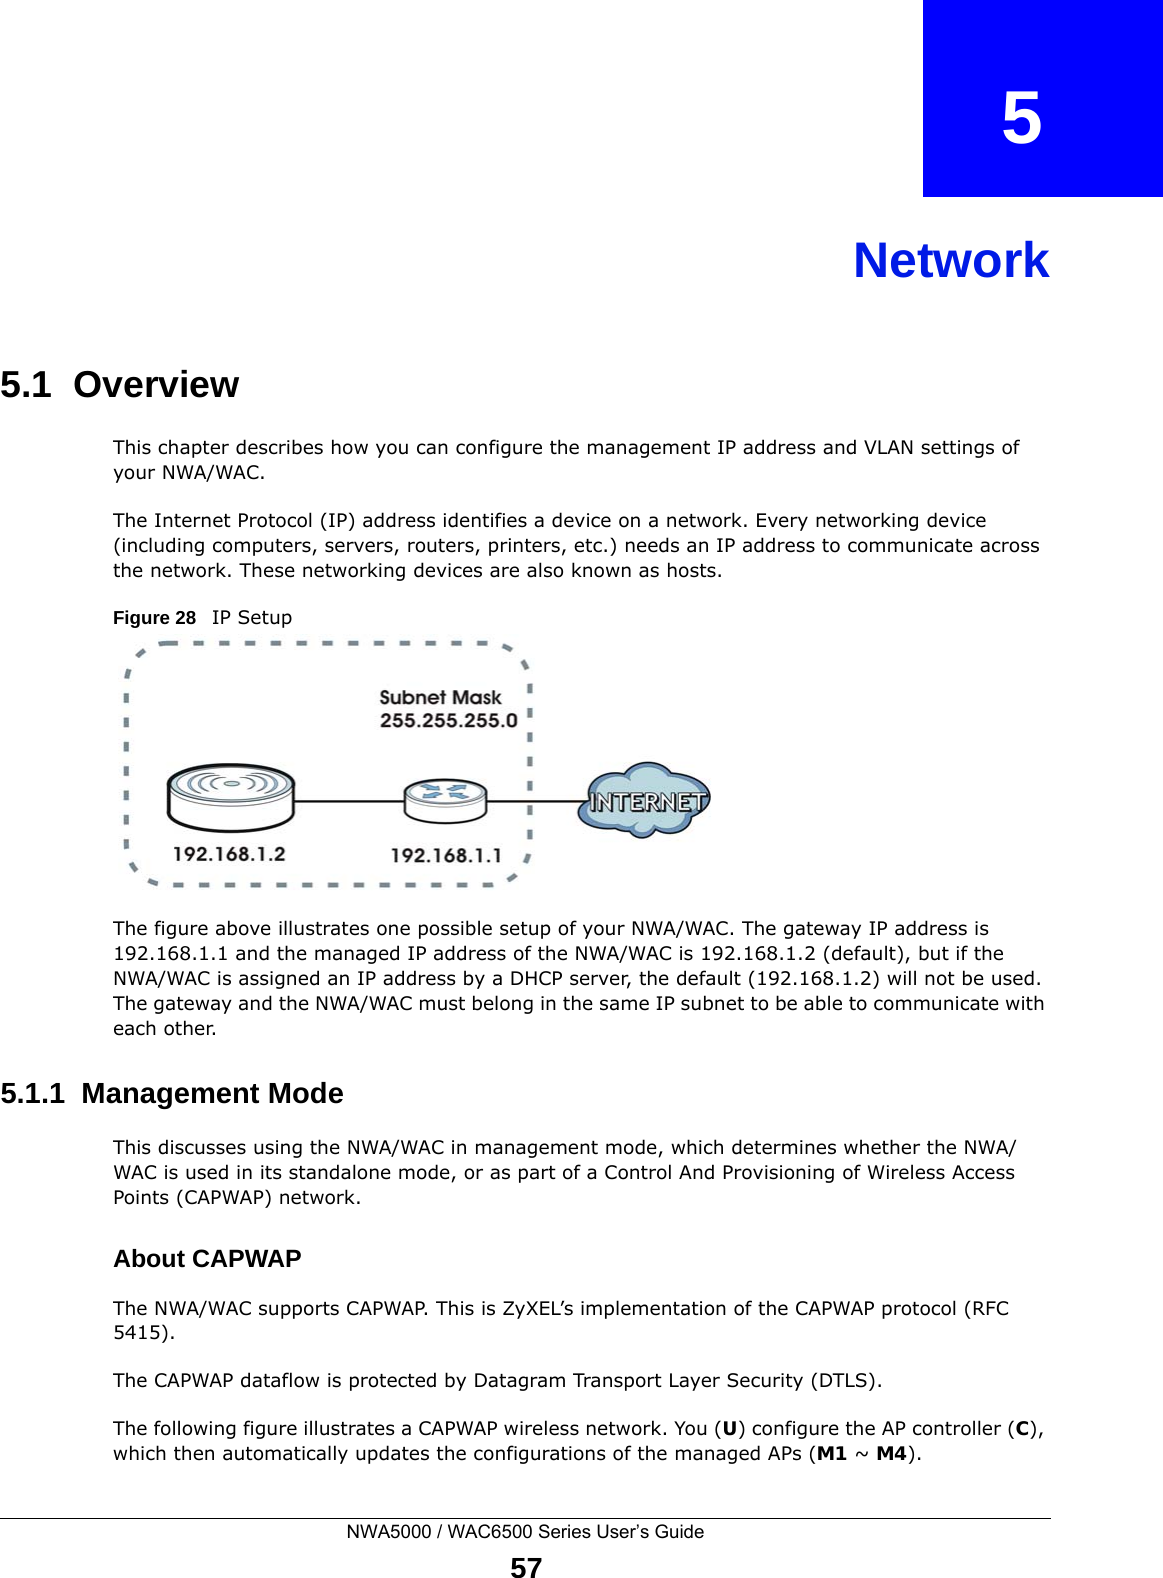 NWA5000 / WAC6500 Series User’s Guide57CHAPTER   5Network5.1  OverviewThis chapter describes how you can configure the management IP address and VLAN settings of your NWA/WAC.The Internet Protocol (IP) address identifies a device on a network. Every networking device (including computers, servers, routers, printers, etc.) needs an IP address to communicate across the network. These networking devices are also known as hosts.Figure 28   IP SetupThe figure above illustrates one possible setup of your NWA/WAC. The gateway IP address is 192.168.1.1 and the managed IP address of the NWA/WAC is 192.168.1.2 (default), but if the NWA/WAC is assigned an IP address by a DHCP server, the default (192.168.1.2) will not be used. The gateway and the NWA/WAC must belong in the same IP subnet to be able to communicate with each other.5.1.1  Management ModeThis discusses using the NWA/WAC in management mode, which determines whether the NWA/WAC is used in its standalone mode, or as part of a Control And Provisioning of Wireless Access Points (CAPWAP) network. About CAPWAPThe NWA/WAC supports CAPWAP. This is ZyXEL’s implementation of the CAPWAP protocol (RFC 5415). The CAPWAP dataflow is protected by Datagram Transport Layer Security (DTLS).The following figure illustrates a CAPWAP wireless network. You (U) configure the AP controller (C), which then automatically updates the configurations of the managed APs (M1 ~ M4). 